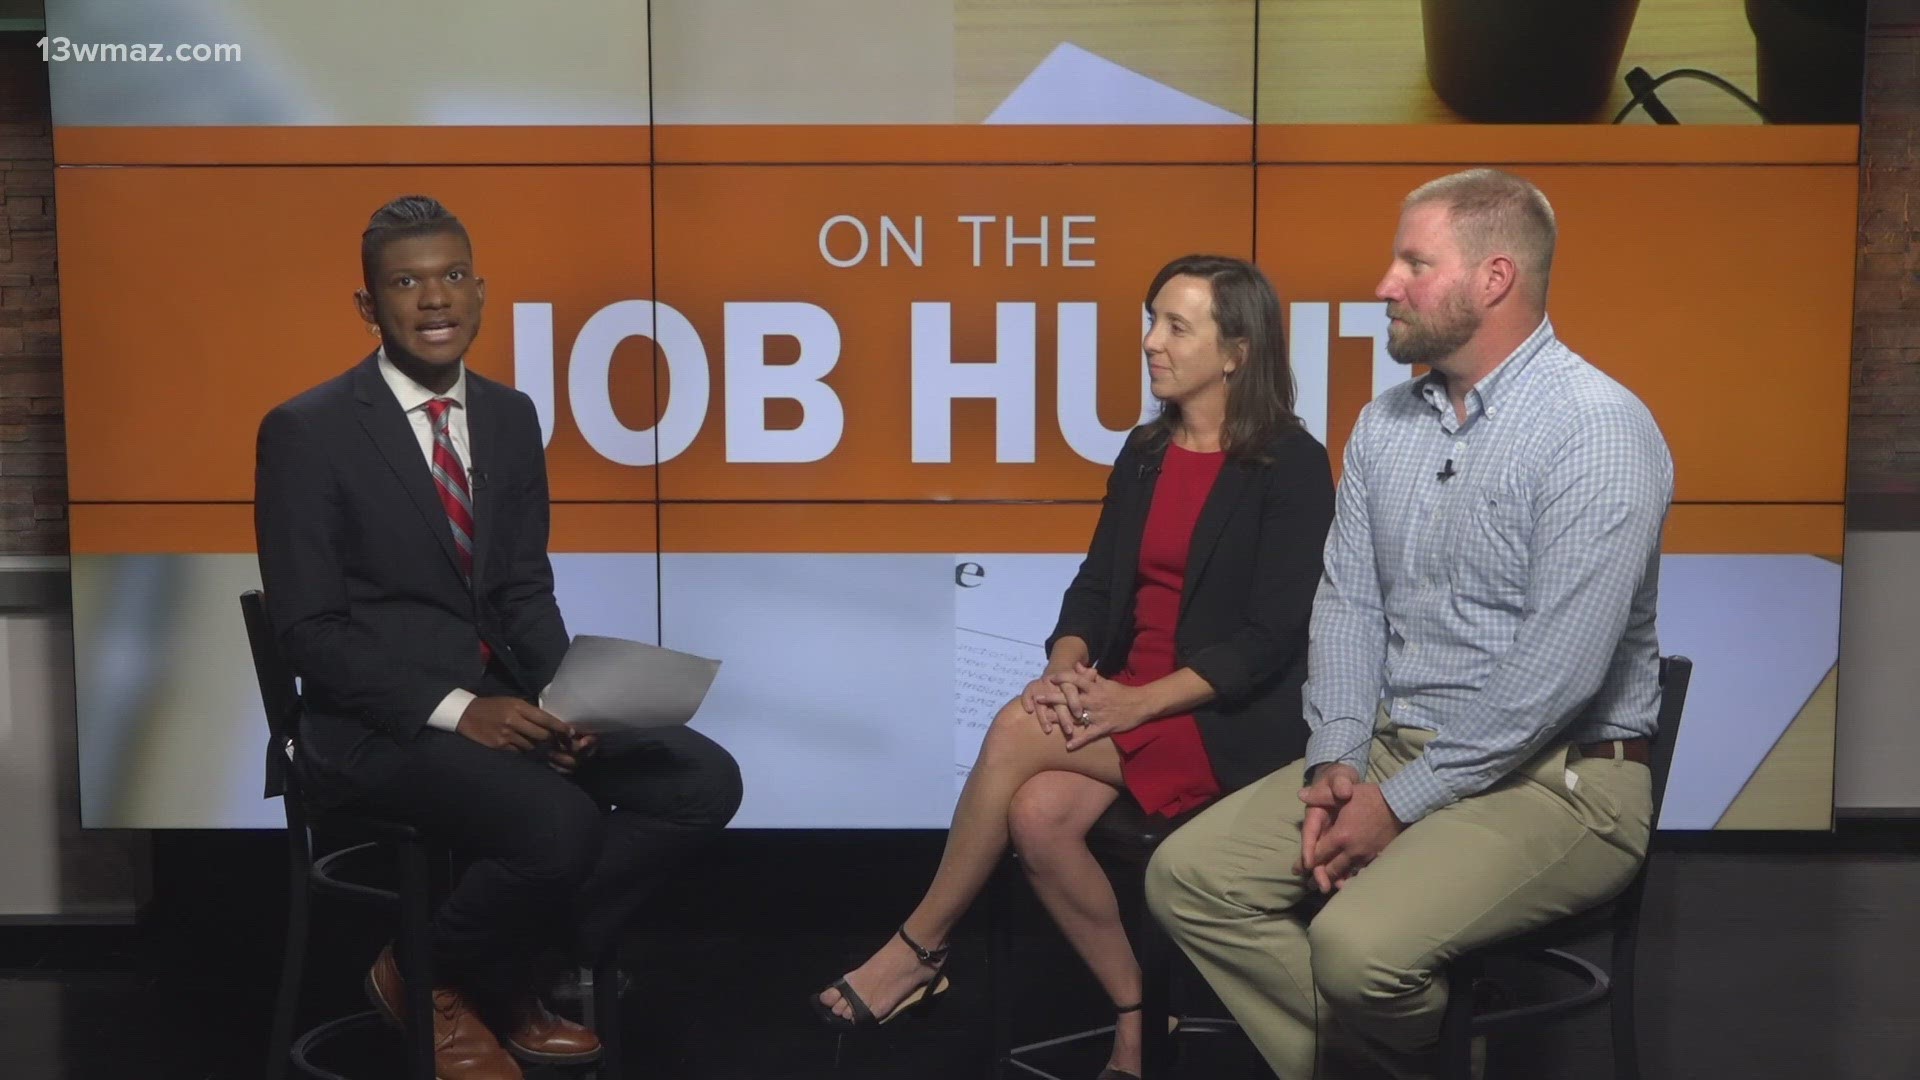 13WMAZ brought in a pair of guests to discuss the growing need for jobs in AI and Cyber Security.